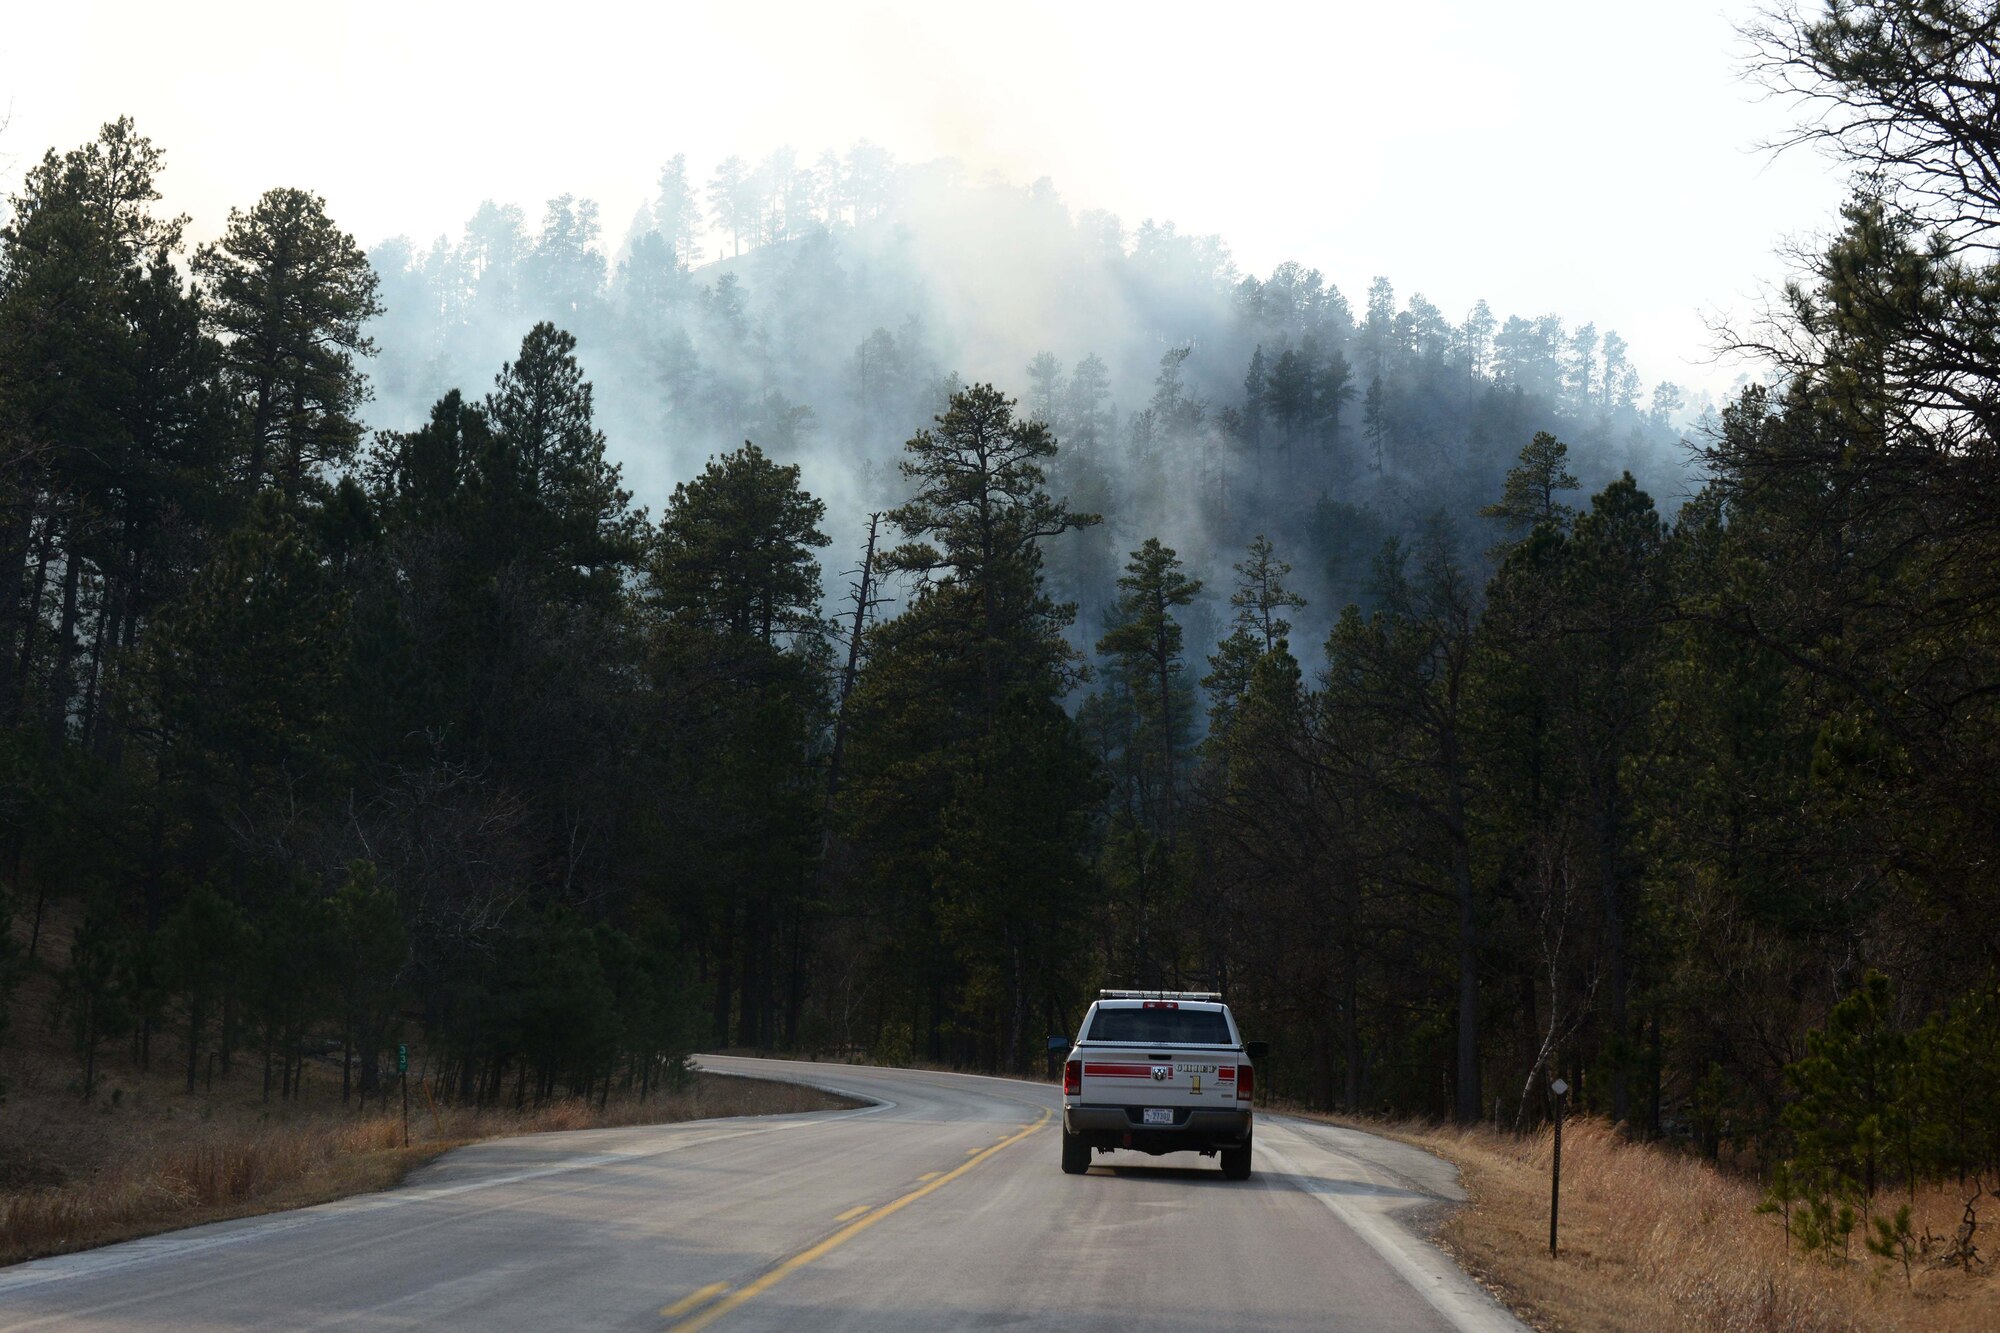 The park wildfire grew rapidly overnight, pushing beyond the park's borders and threatening nearby communities.